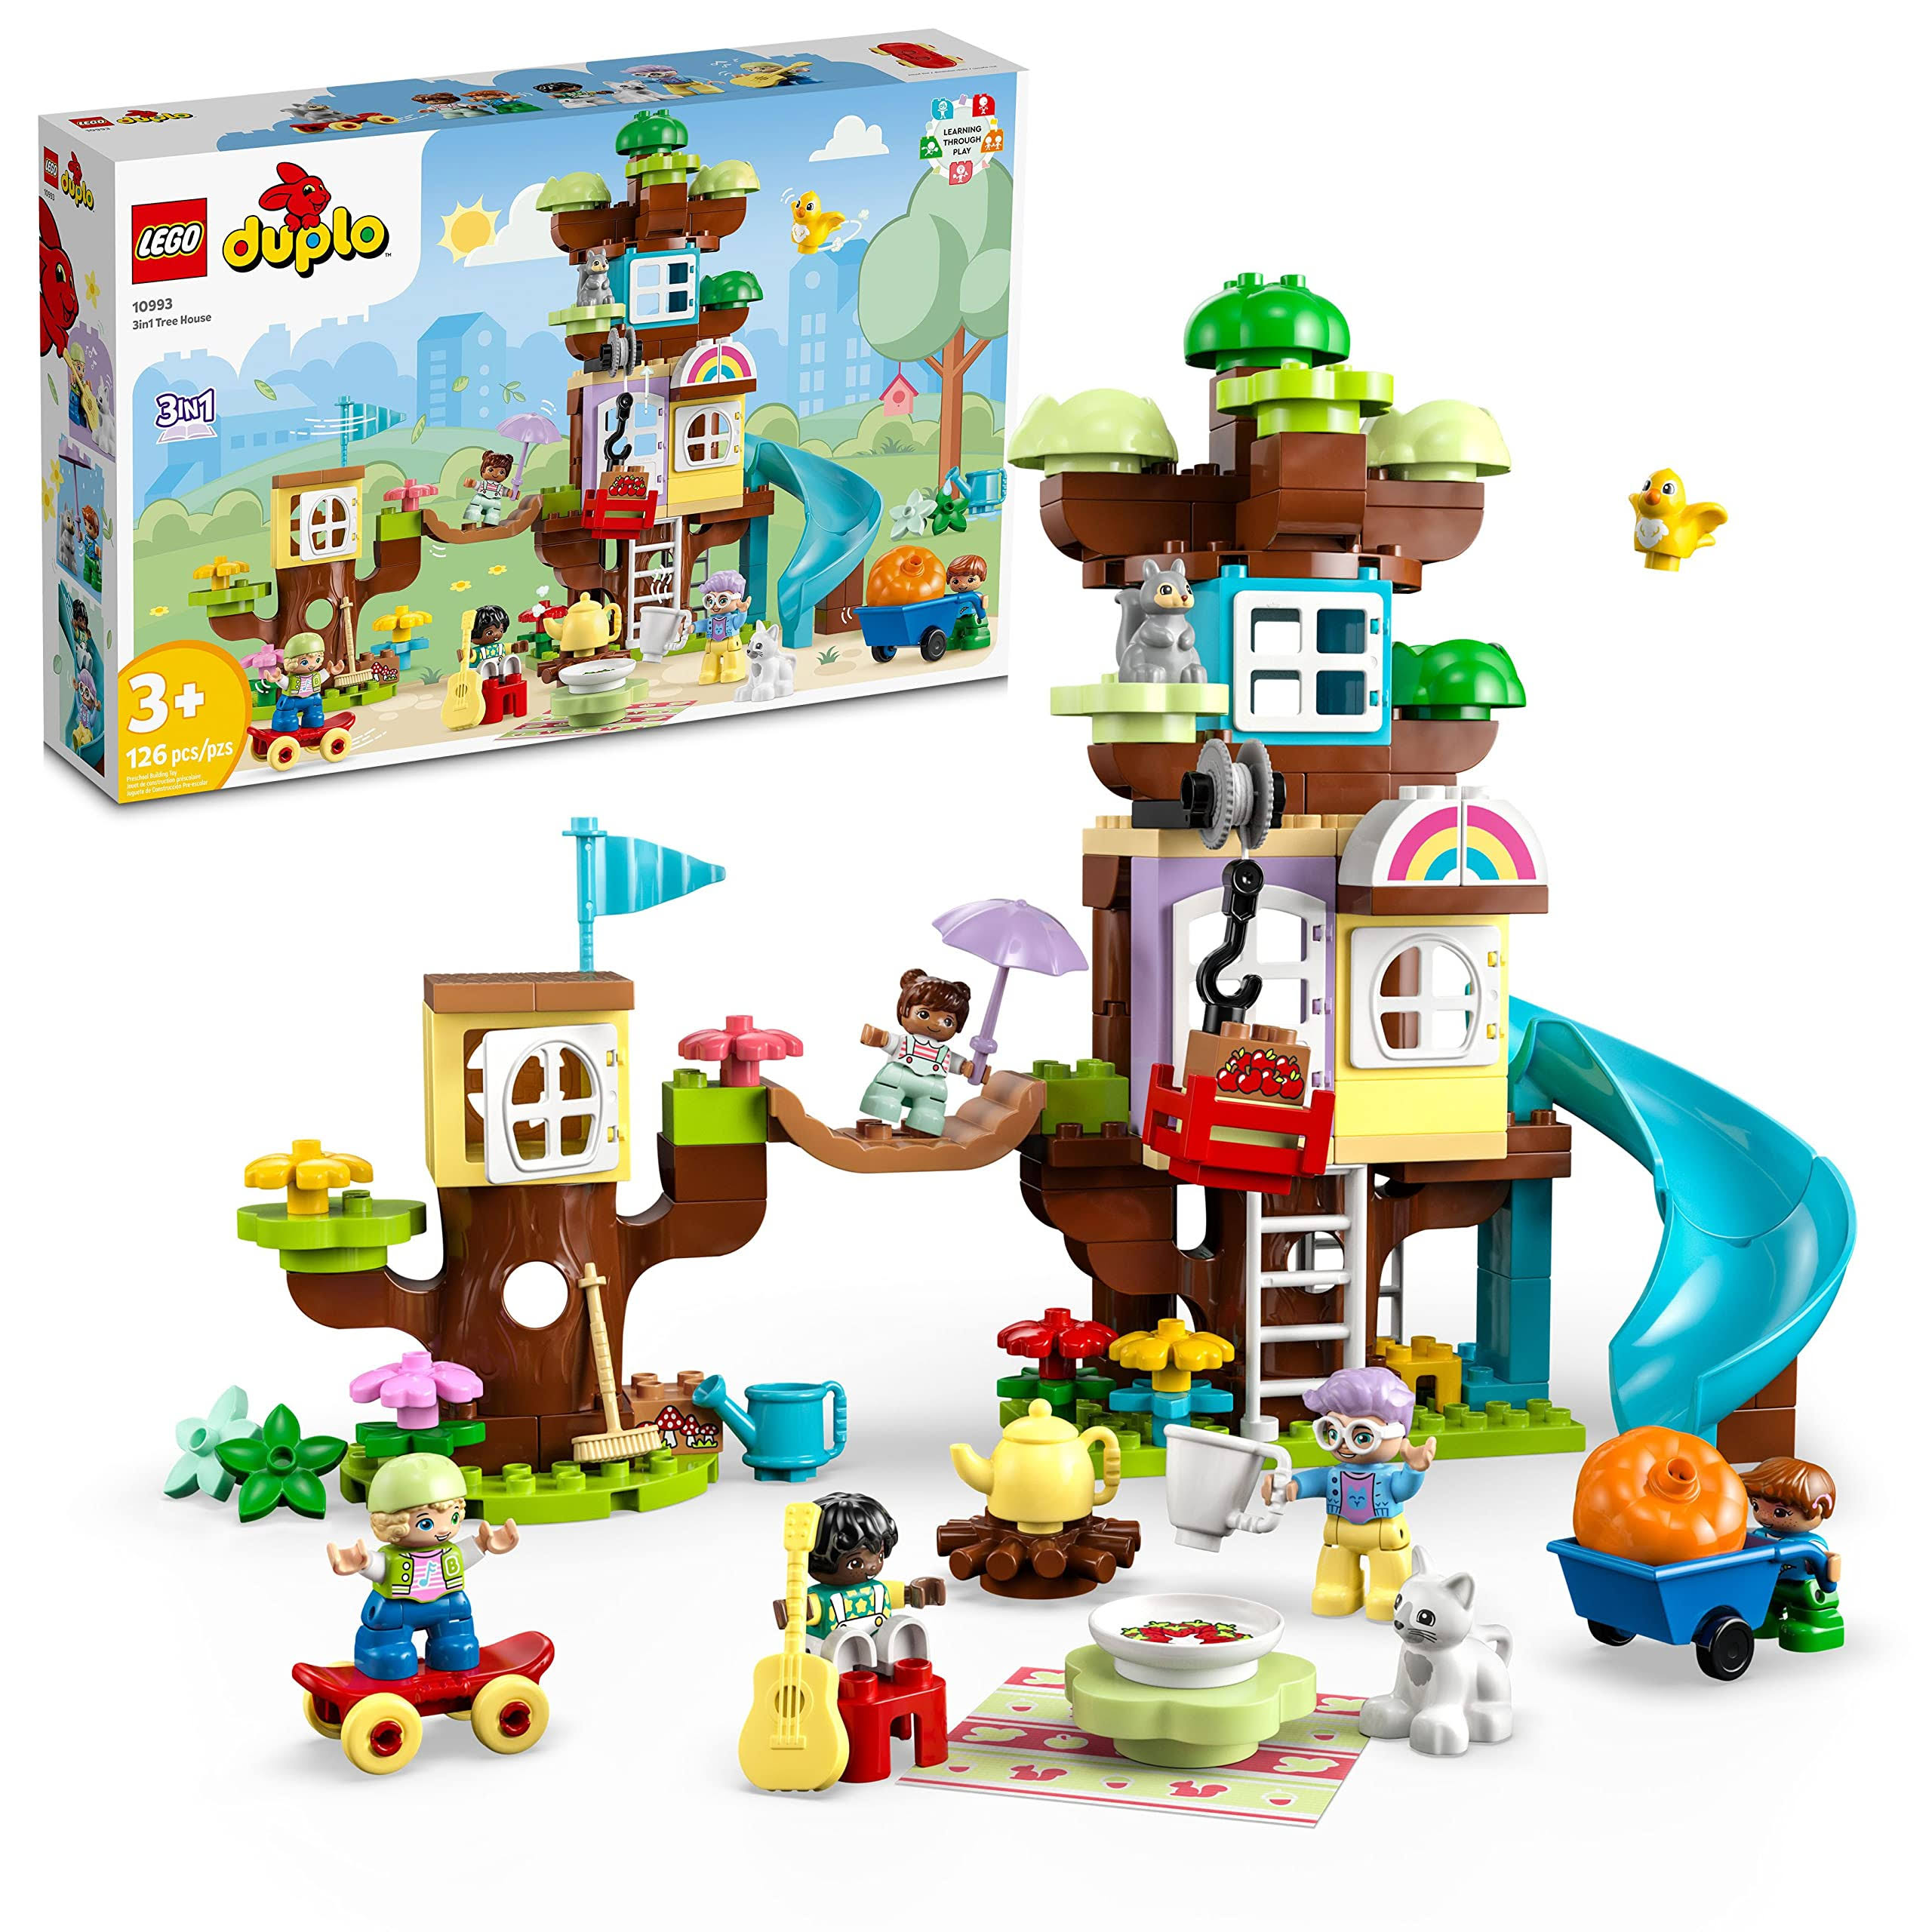 Lego 10993 Duplo 3-in-1 Tree House